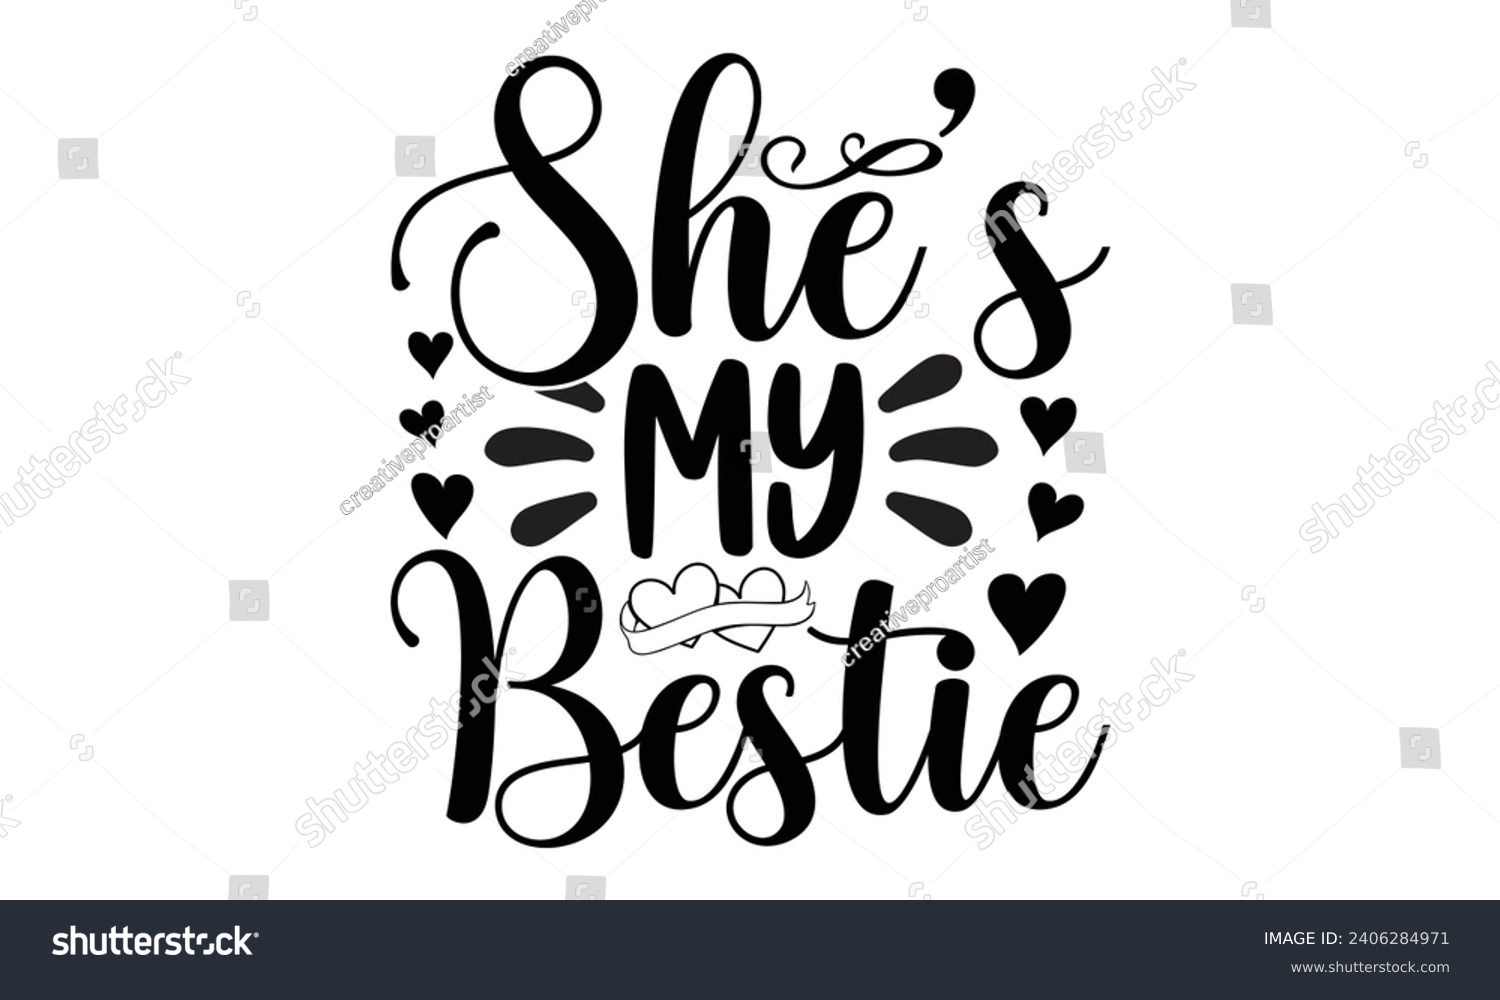 SVG of She’s My Bestie- Best friends t- shirt design, Hand drawn lettering phrase, Illustration for prints on bags, posters, cards eps, Files for Cutting, Isolated on white background. svg